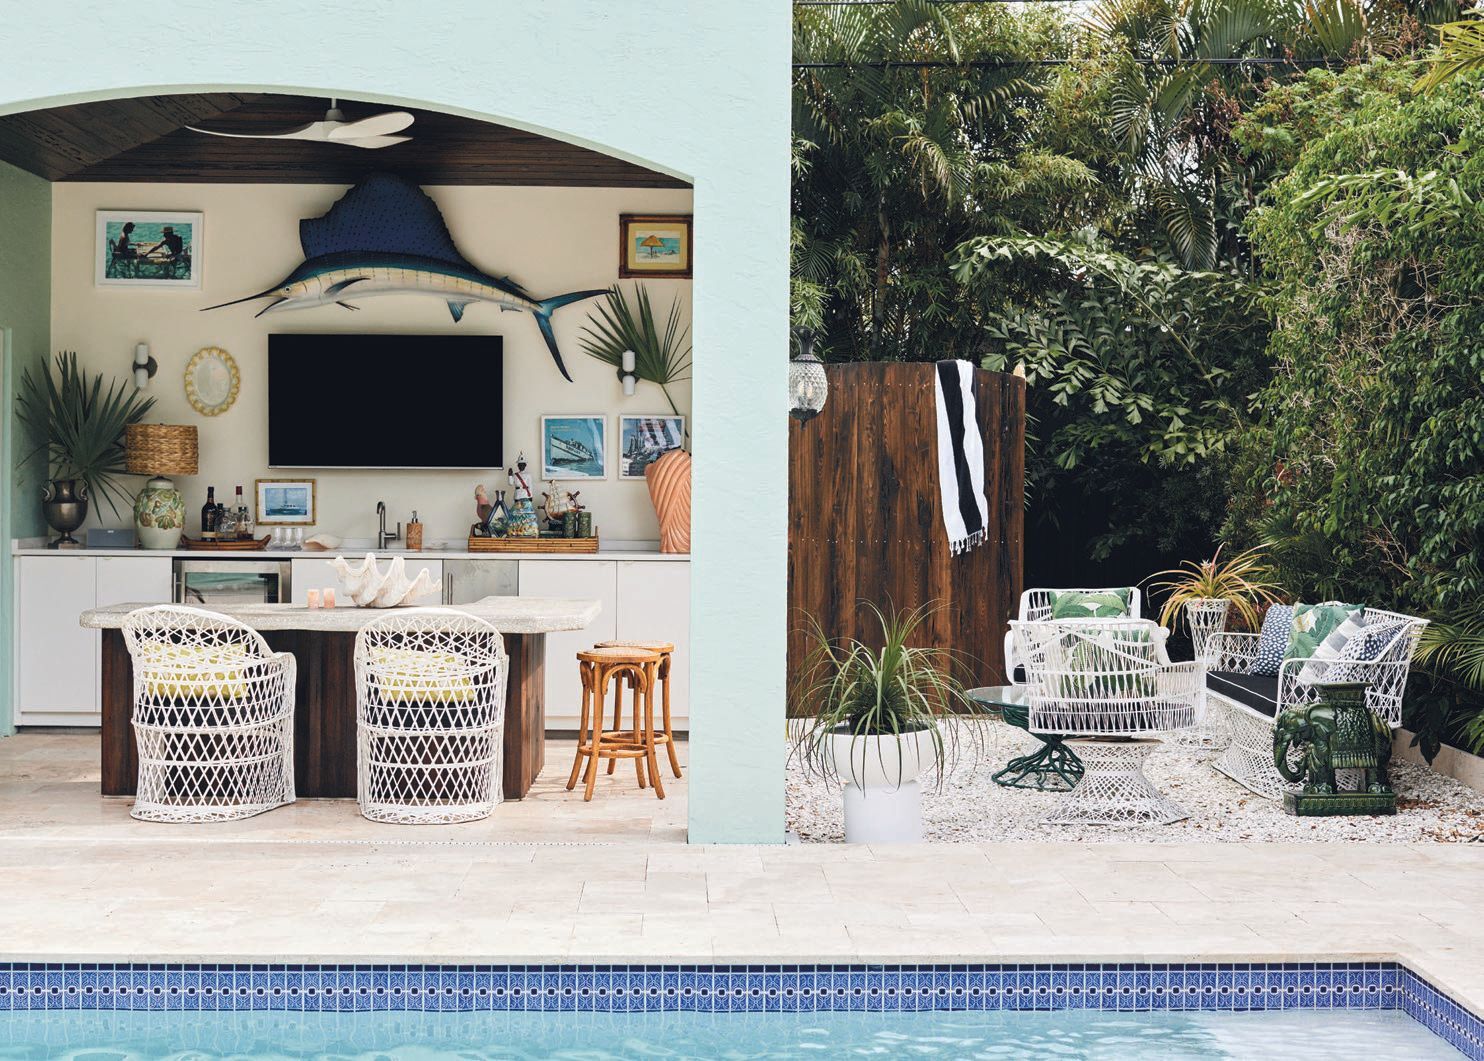 Korinne Belock’s outdoor oasis at her home in West Palm Beach PHOTOGRAPHED BY WING HO & CAPEHART